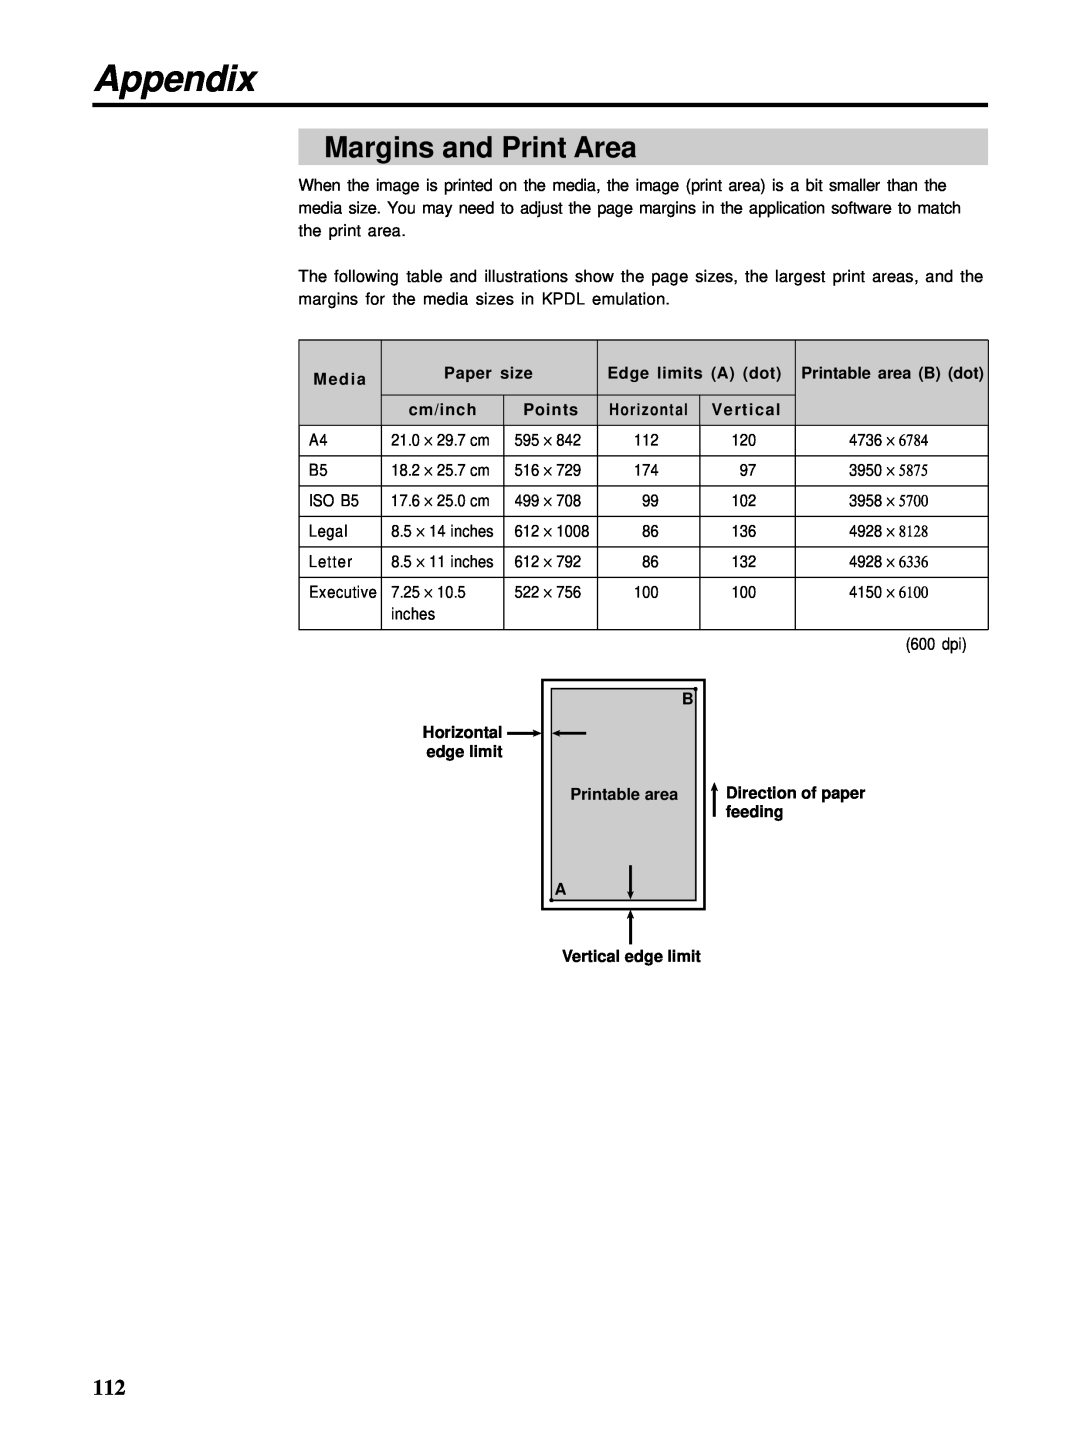 HP Ci 1100 manual Margins and Print Area, Appendix, 21.0, 18.2, 17.6, 8.5 ⋅ 14 inches, 612 ⋅, 8.5 ⋅ 11 inches, 7.25 